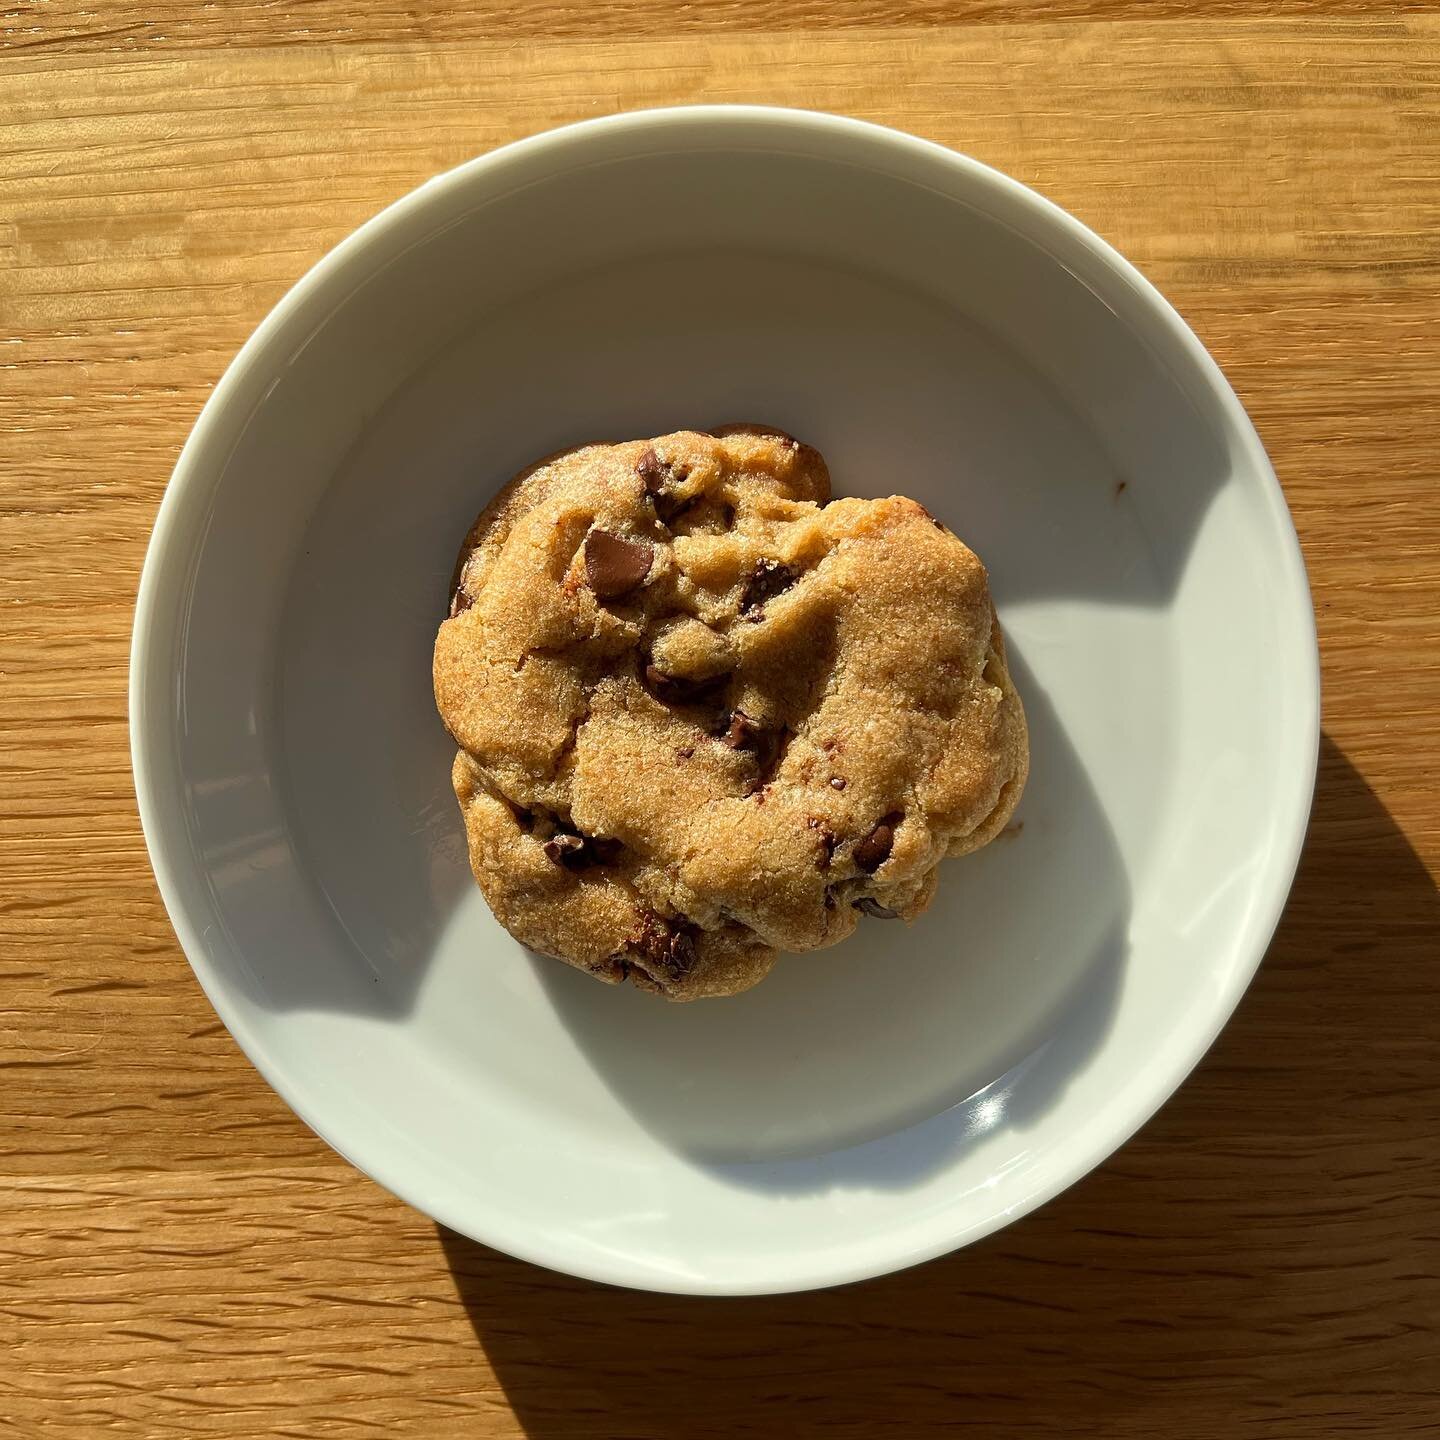 New cookie alert! Brown butter chocolate chip, made fresh every morning. Come test one out and let us know how you like it! 🍪